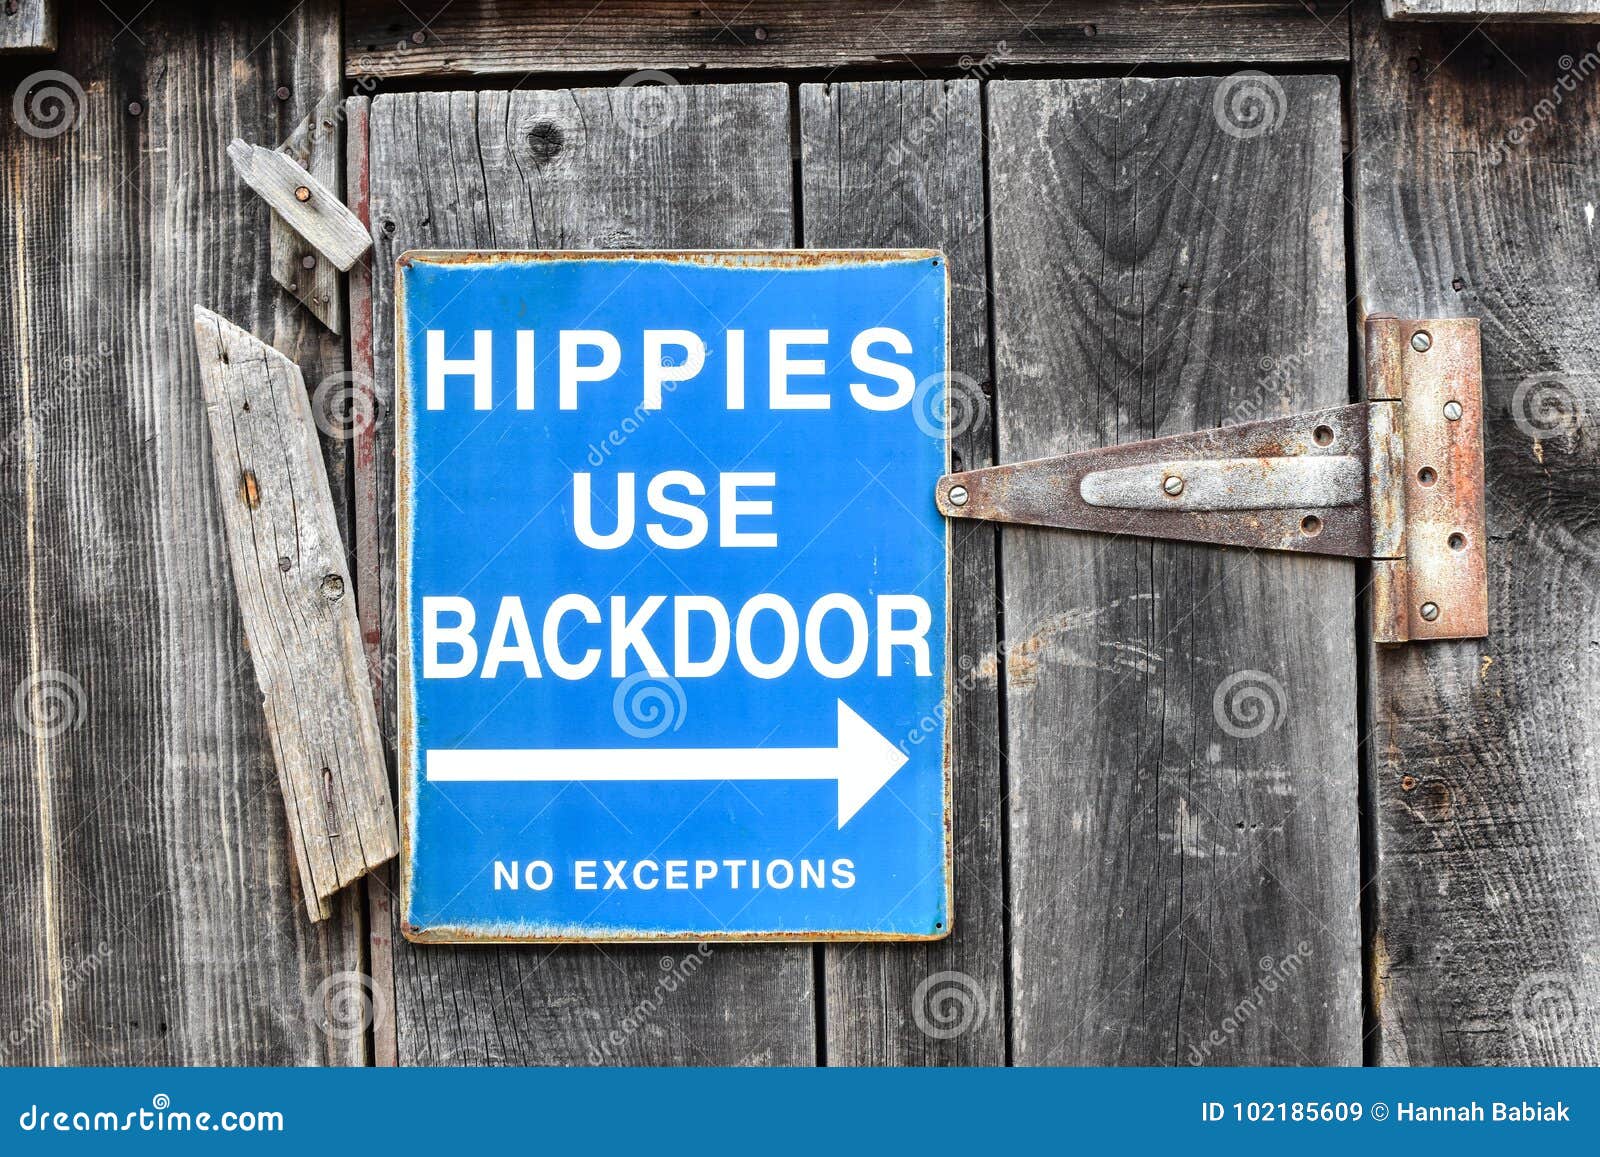 hippies use backdoor sign